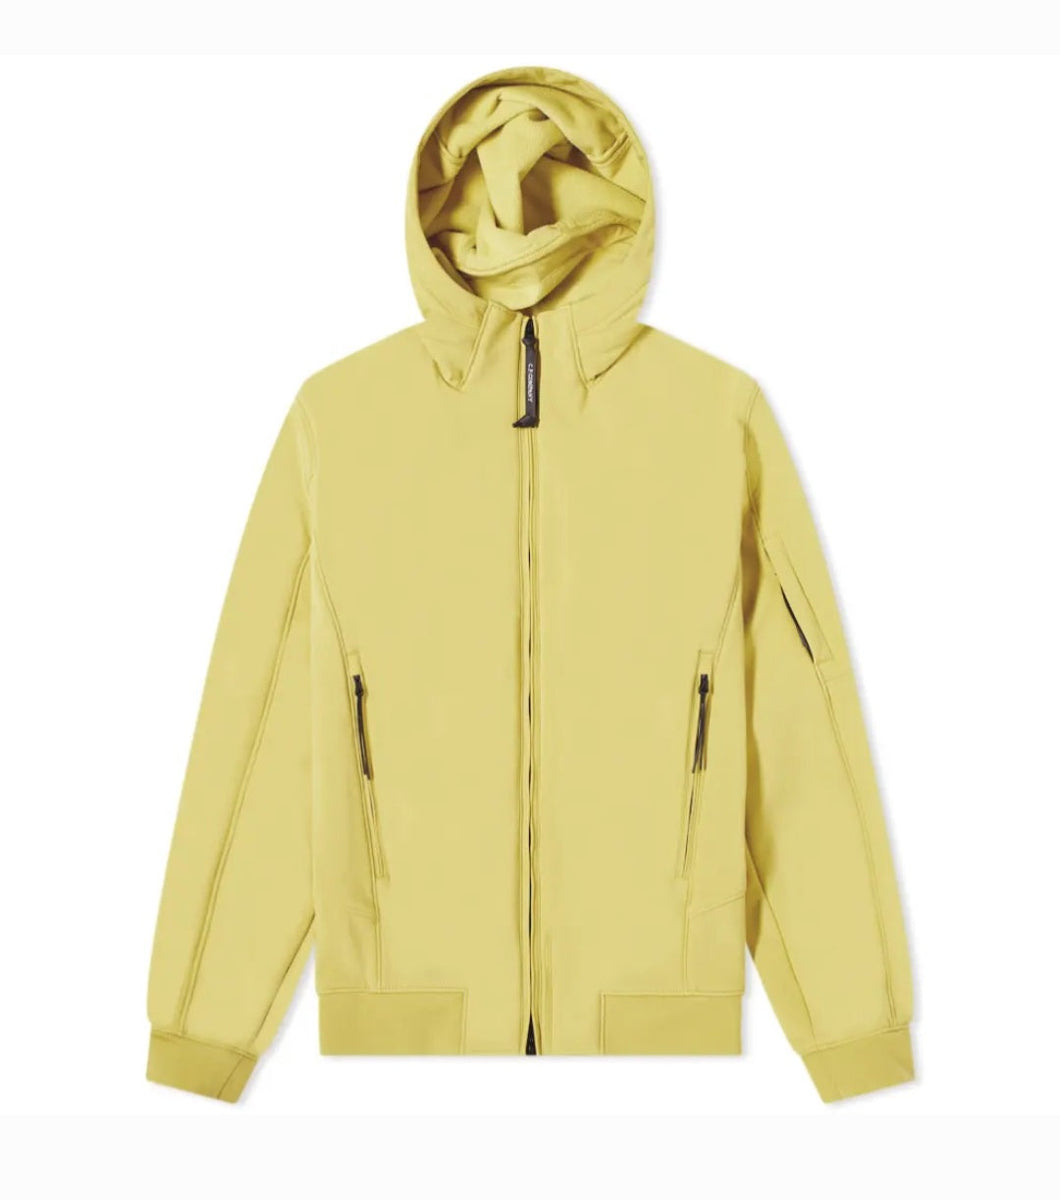 Cp Company Junior Soft Shell Lens Jacket in Golden Palm